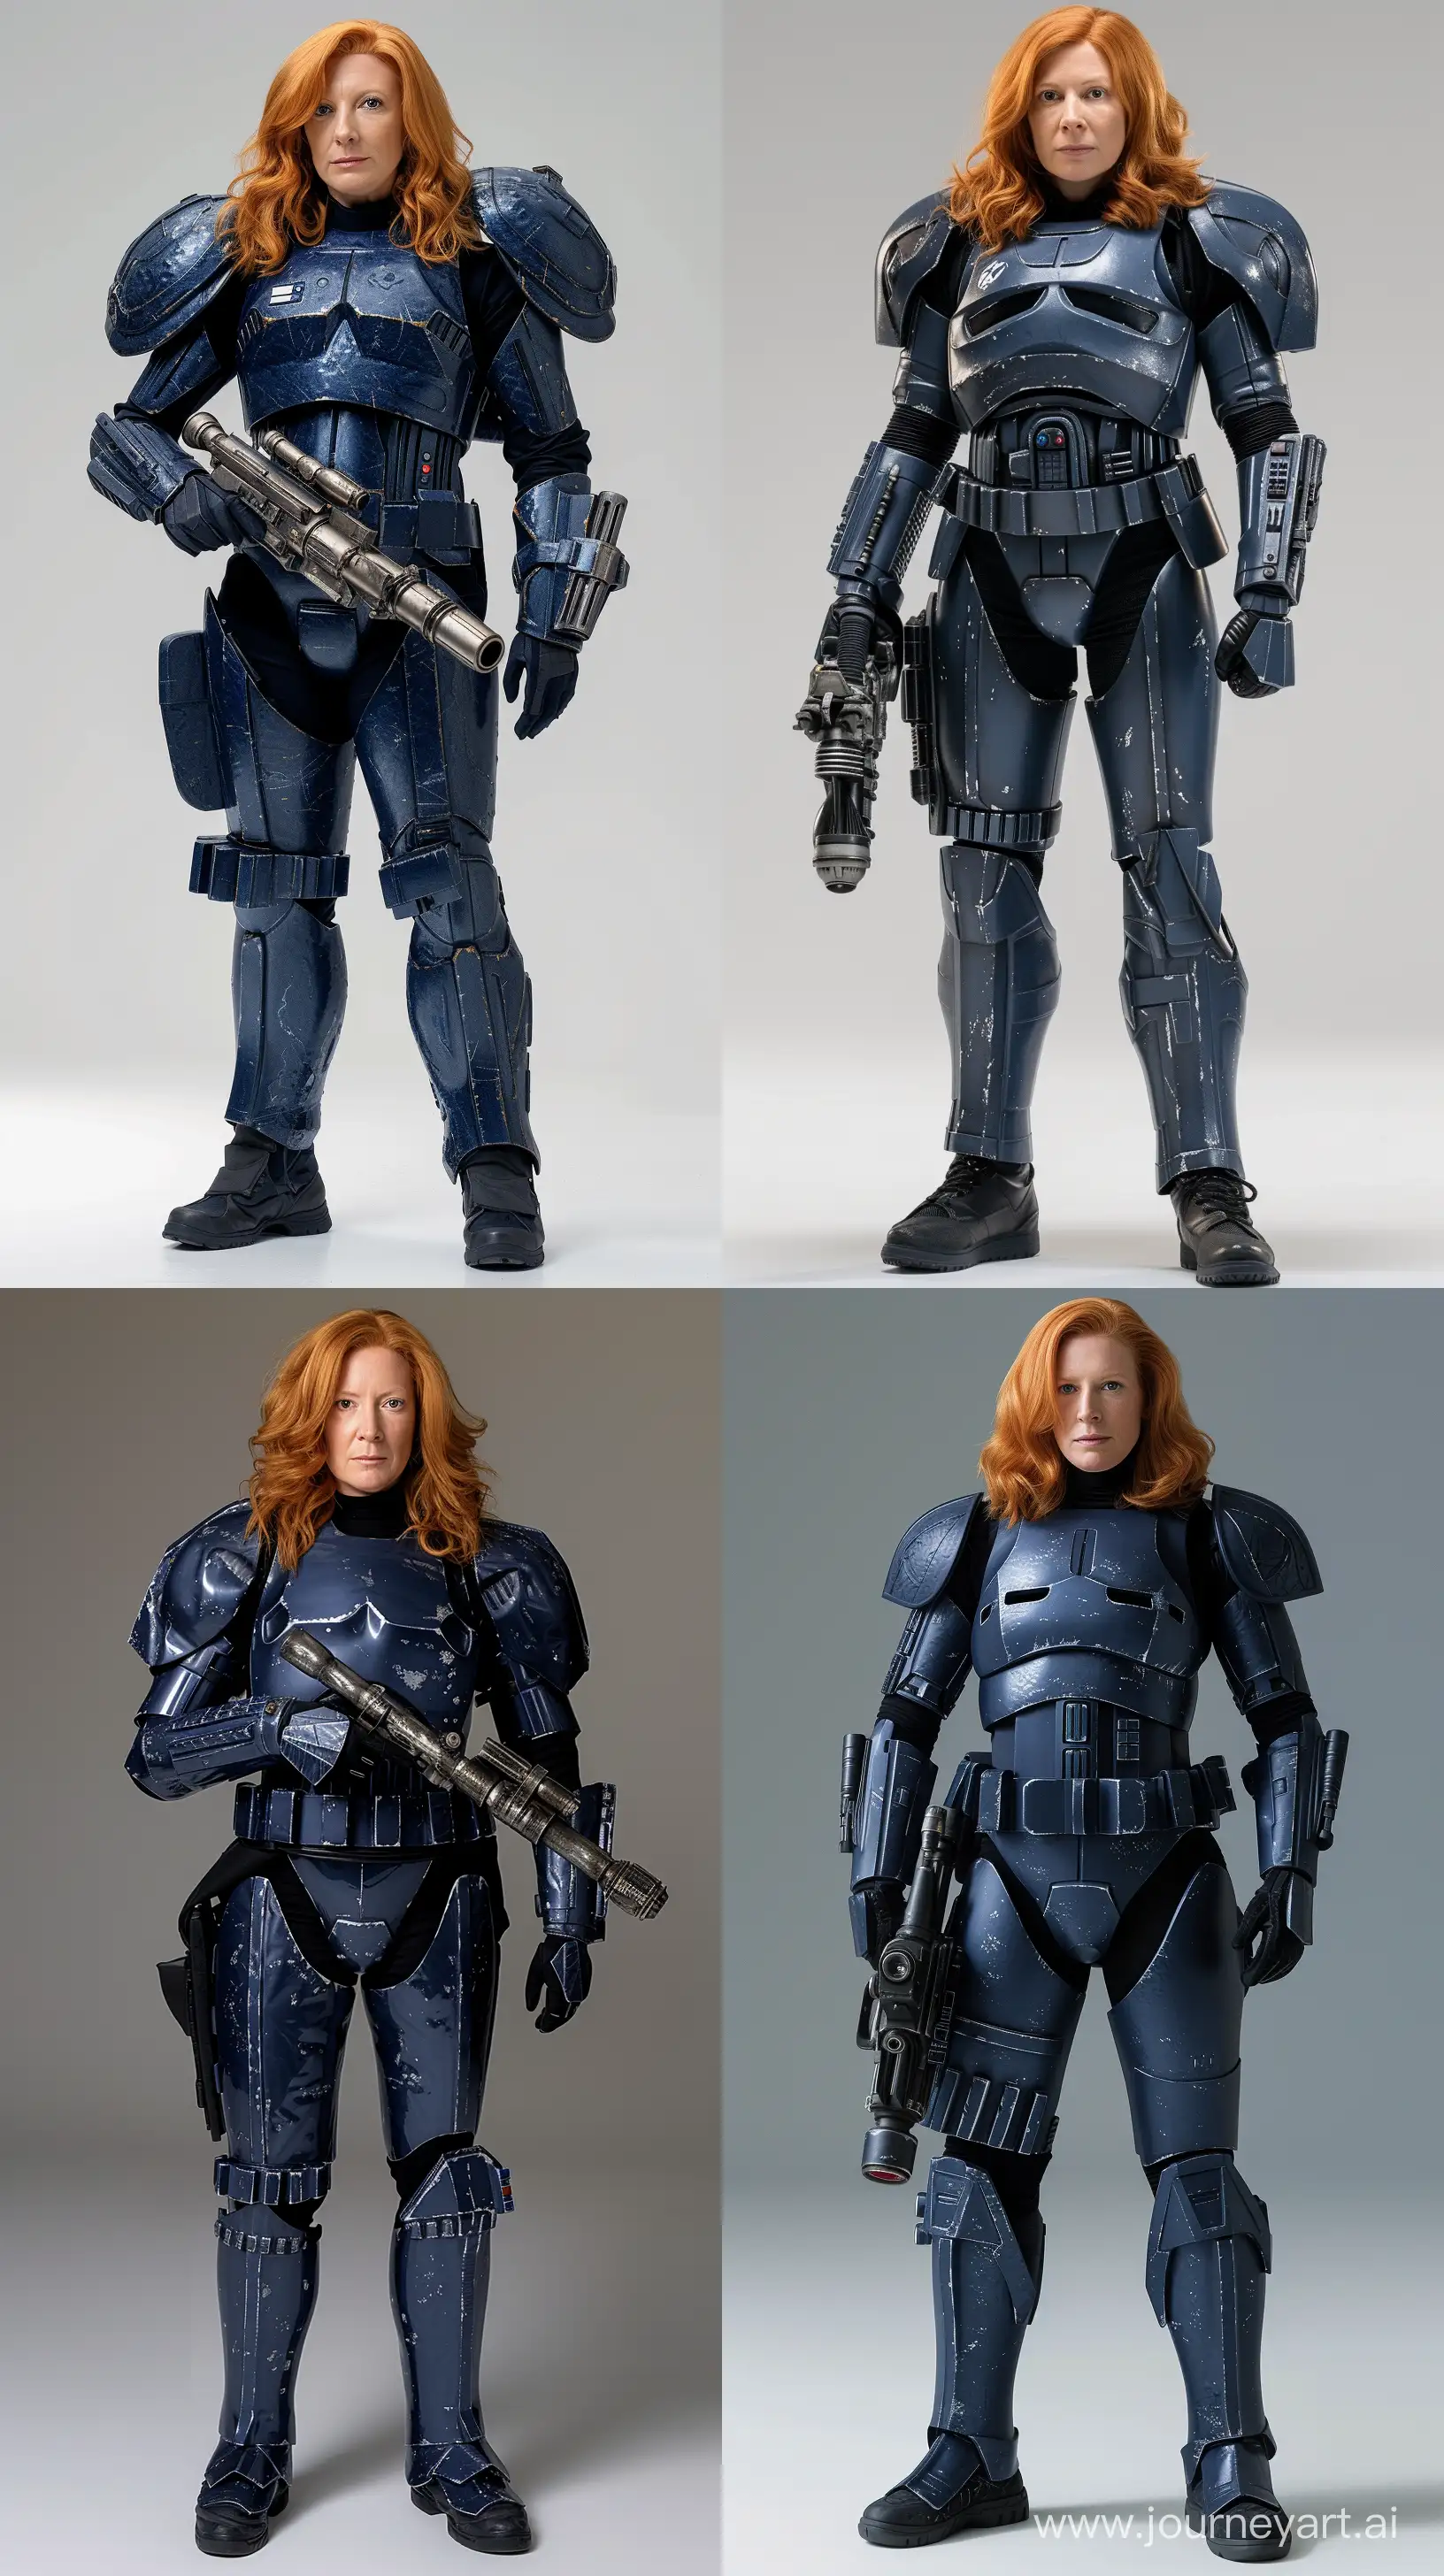 GingerHaired-Stormtrooper-Futuristic-Armor-Clad-by-Gillian-Anderson